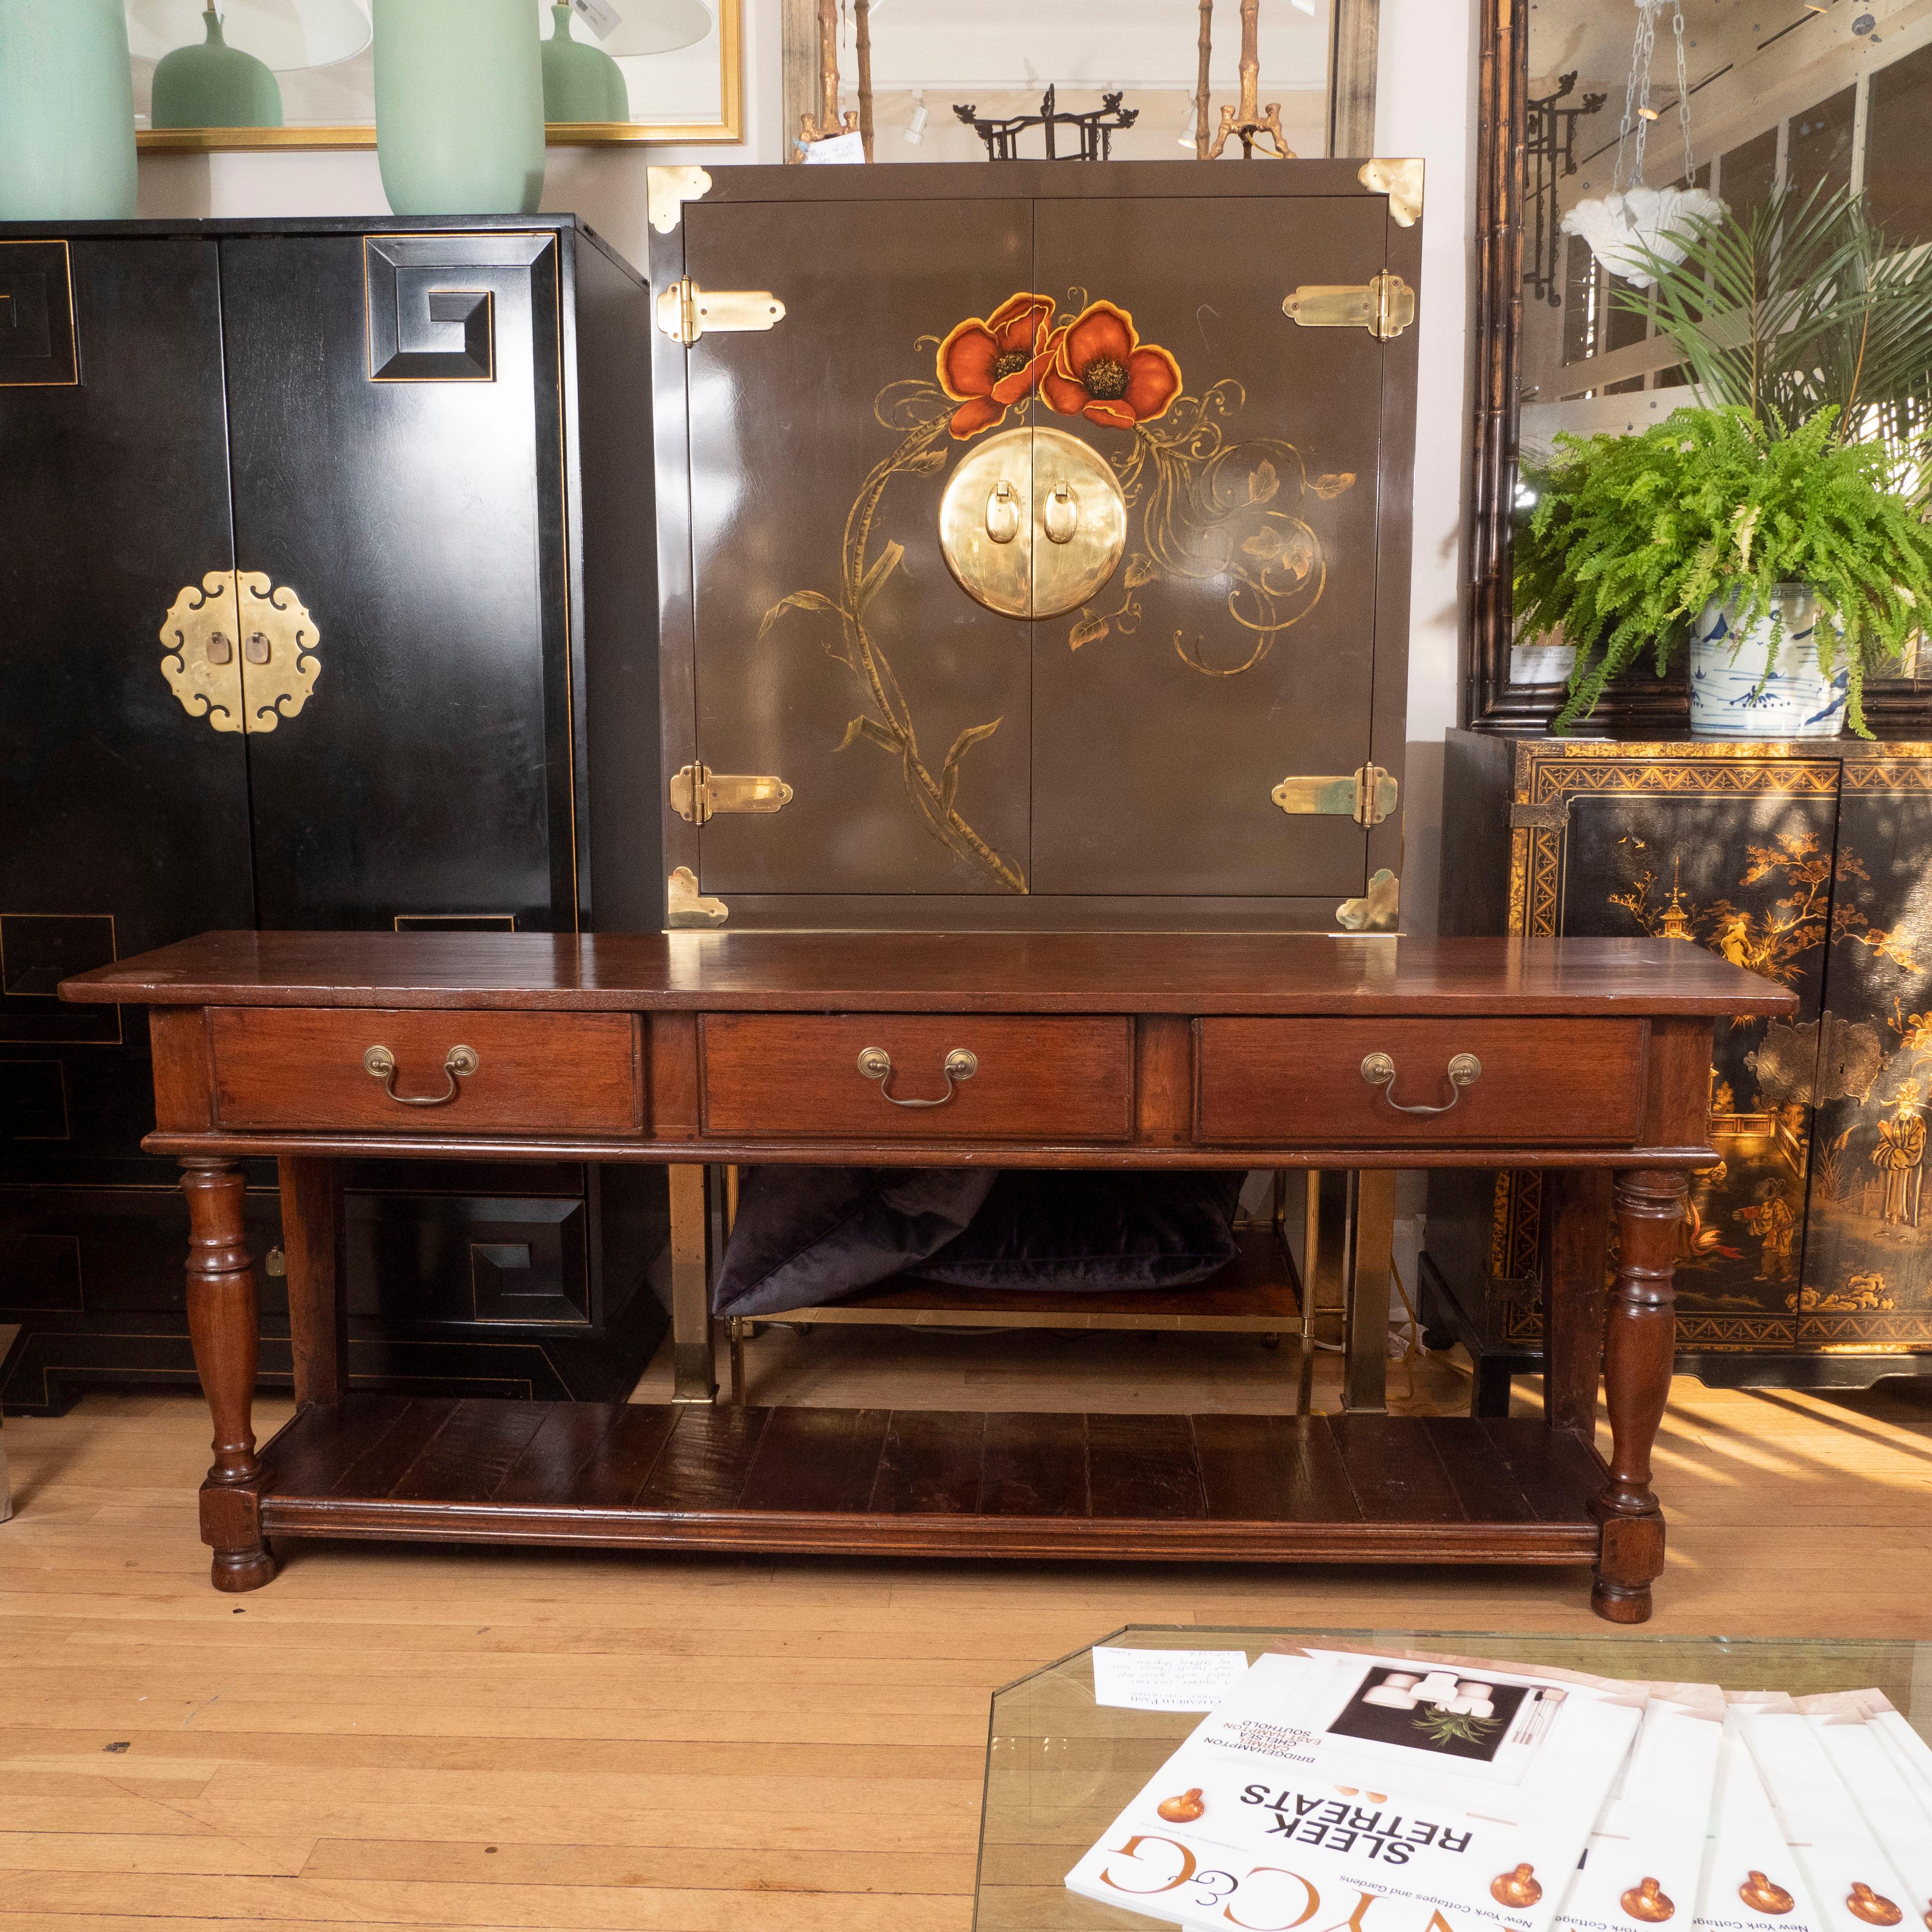 Oozing with character, this long 19th century English oak console/dresser would be perfect in any room. The piece features three drawers with brass pulls, a lower shelf and turned legs. Great as a server, a TV console or behind a sofa.